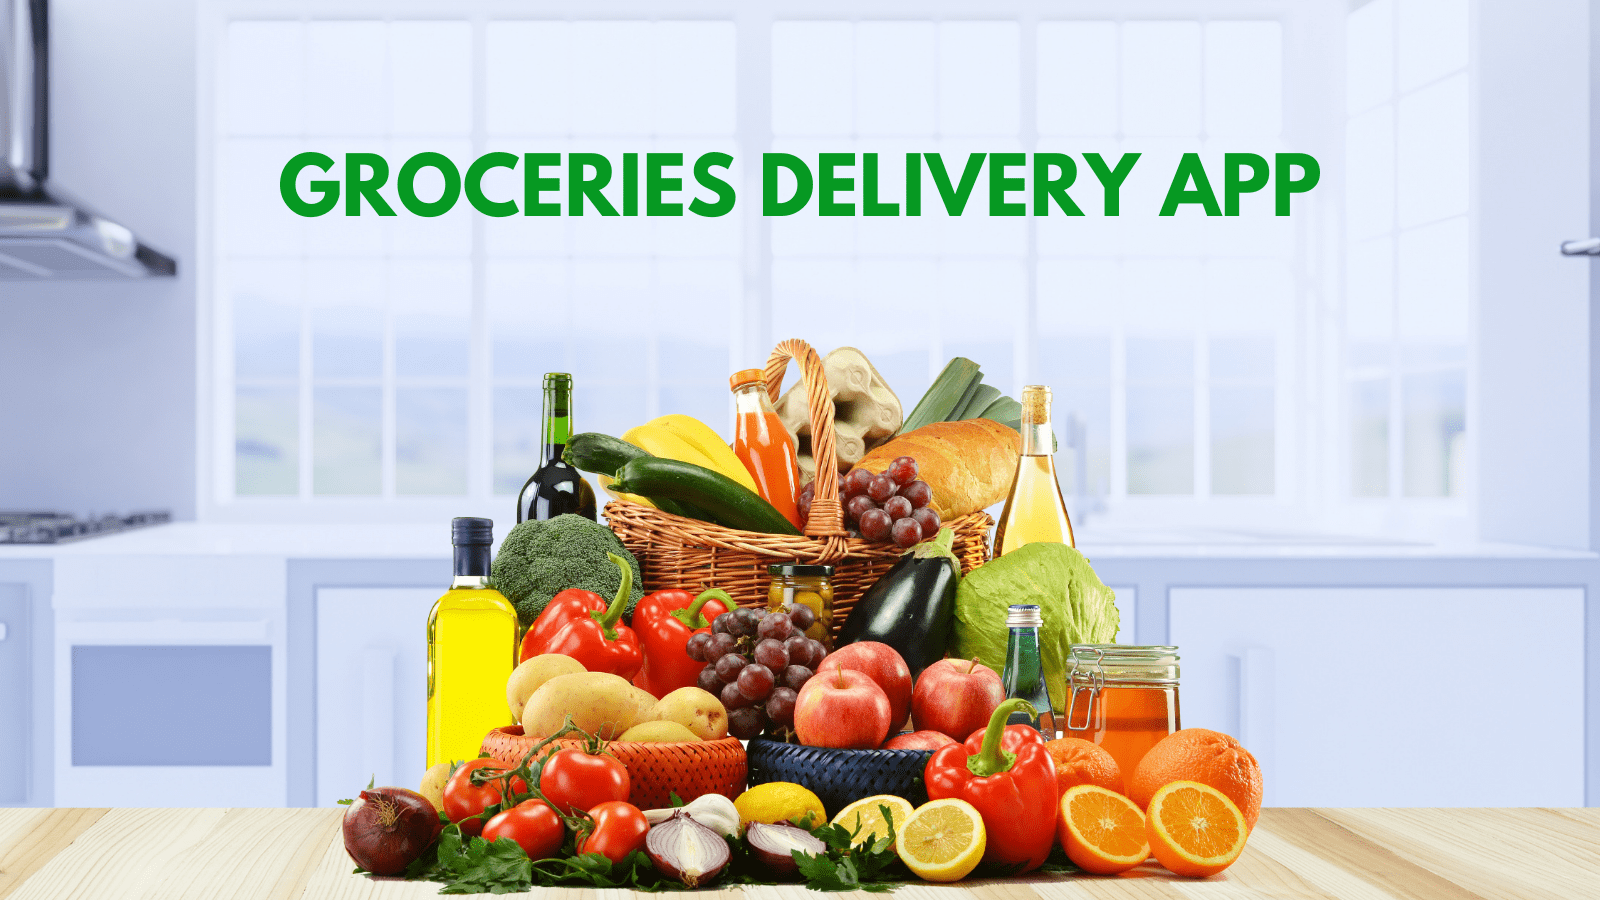 How to get Success with your New Online Grocery Business in 2022